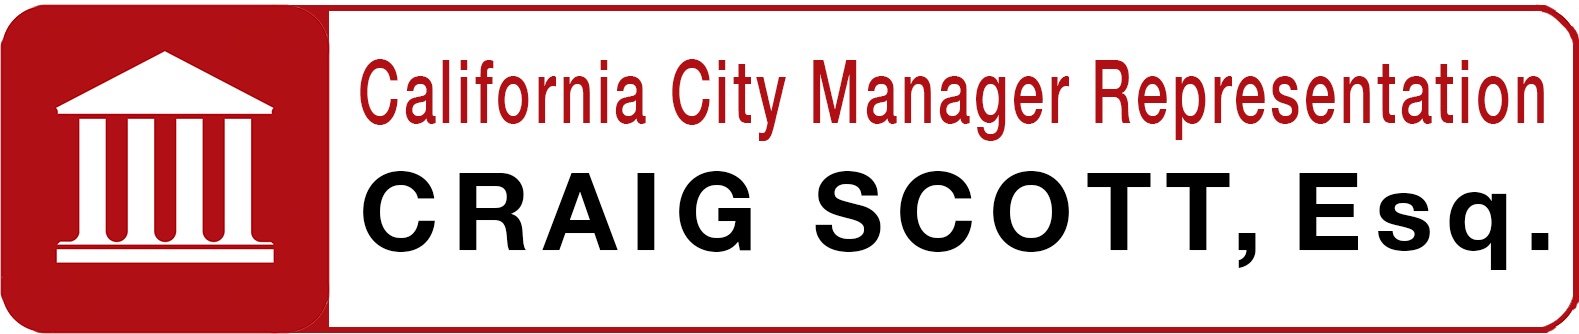 City Manager Law